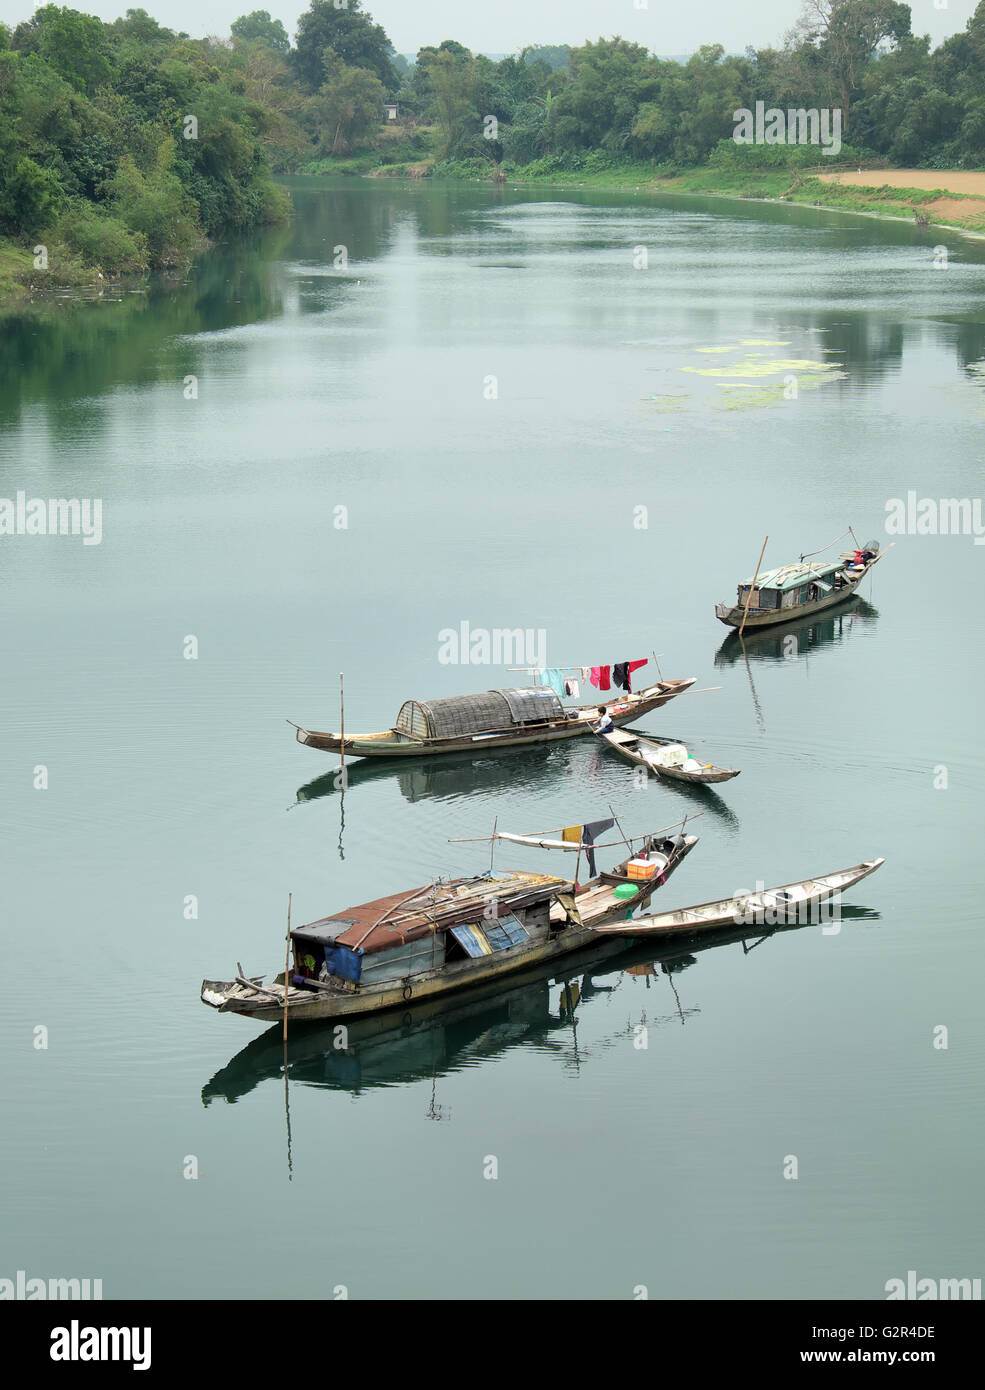 Beautiful landscape at Quang Binh countryside, Viet Nam on day, group of row boat floating on river at fishing village Stock Photo